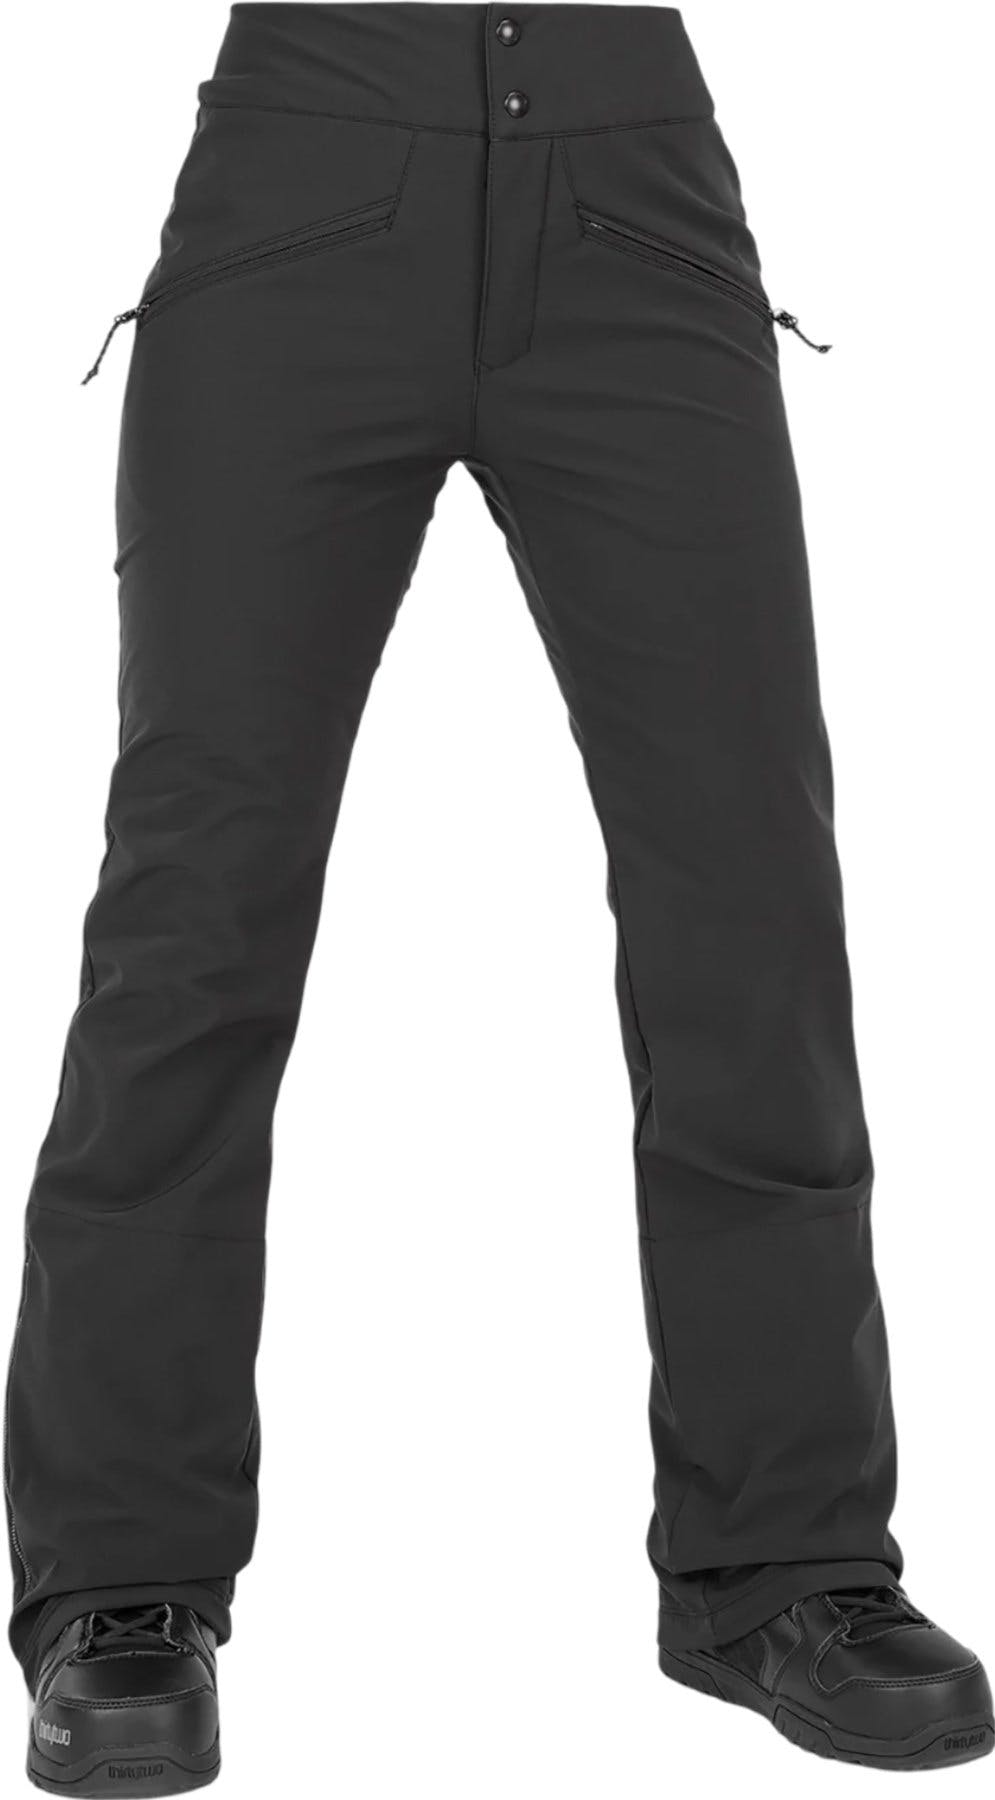 Product image for Battle Stretch HR Trousers - Women's